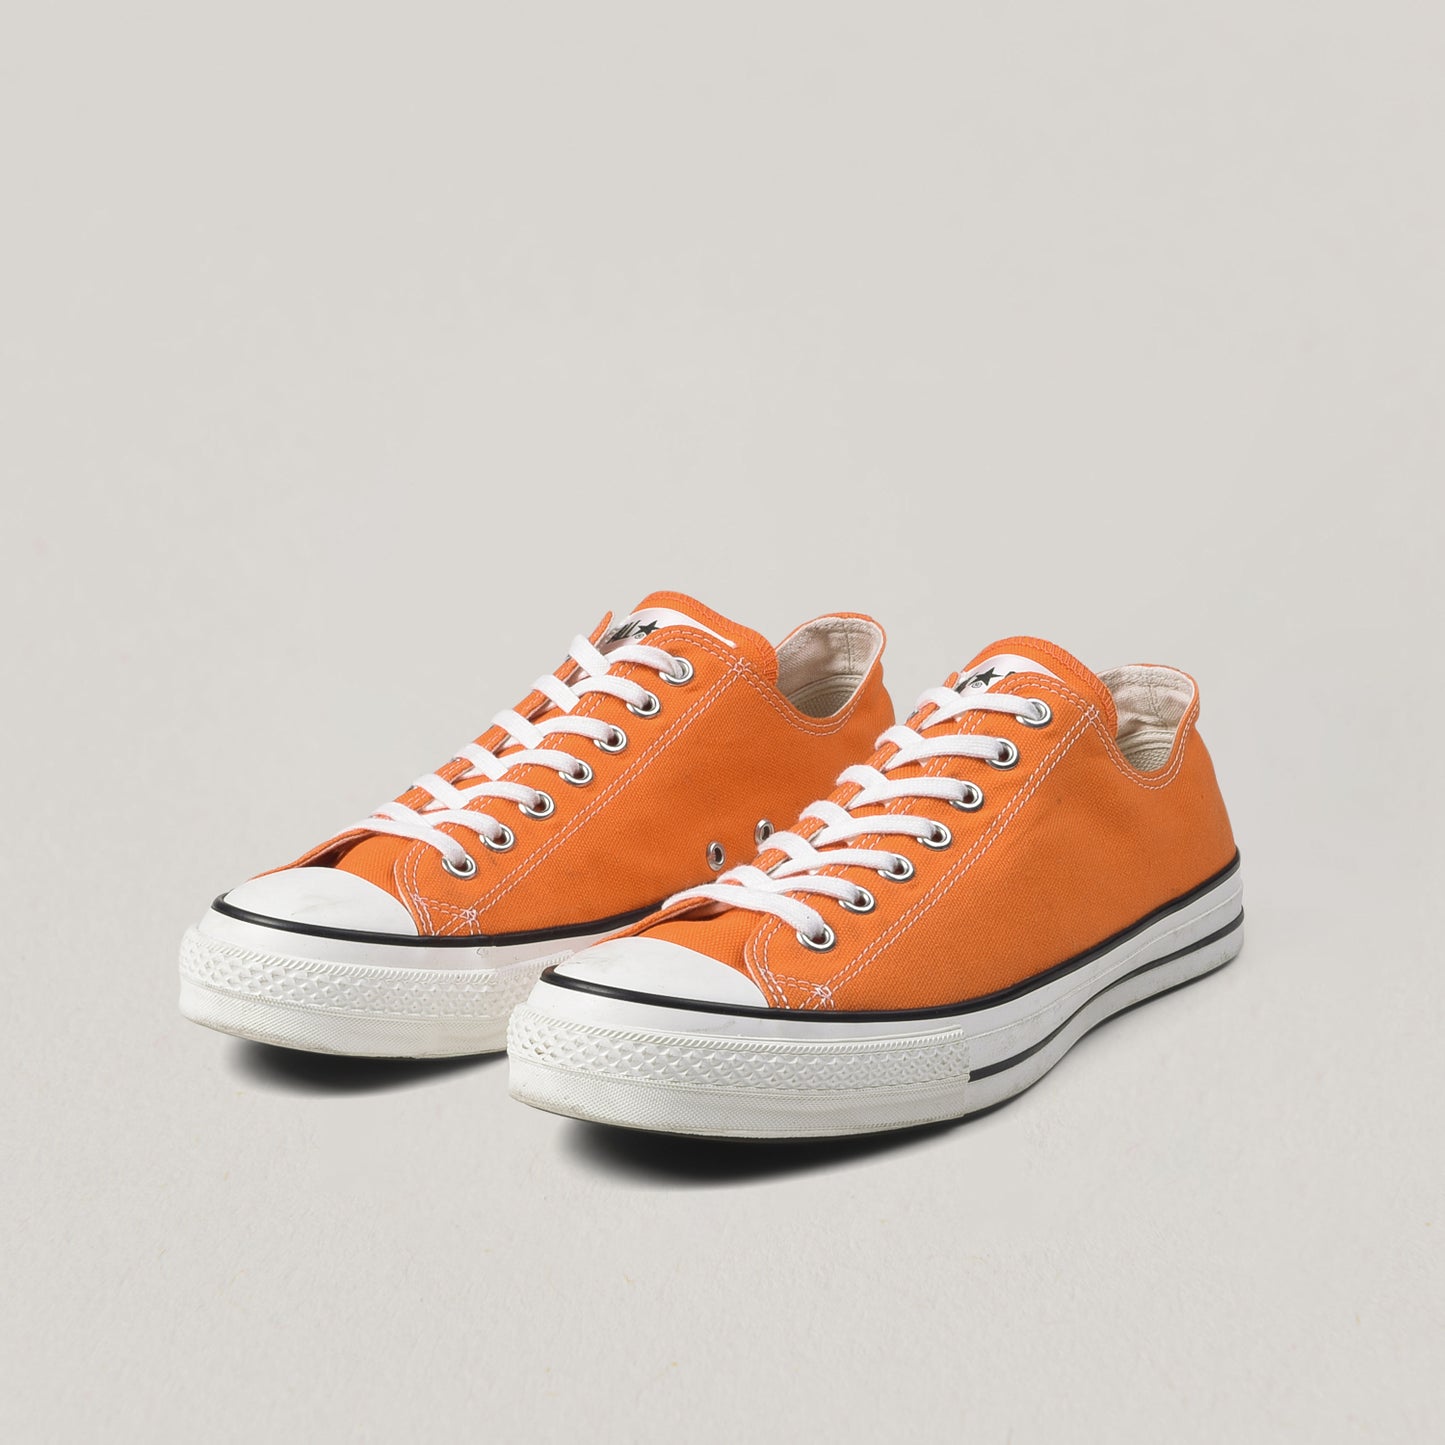 USED CONVERSE ALLSTAR MADE IN JAPAN OX LOW - ORANGE